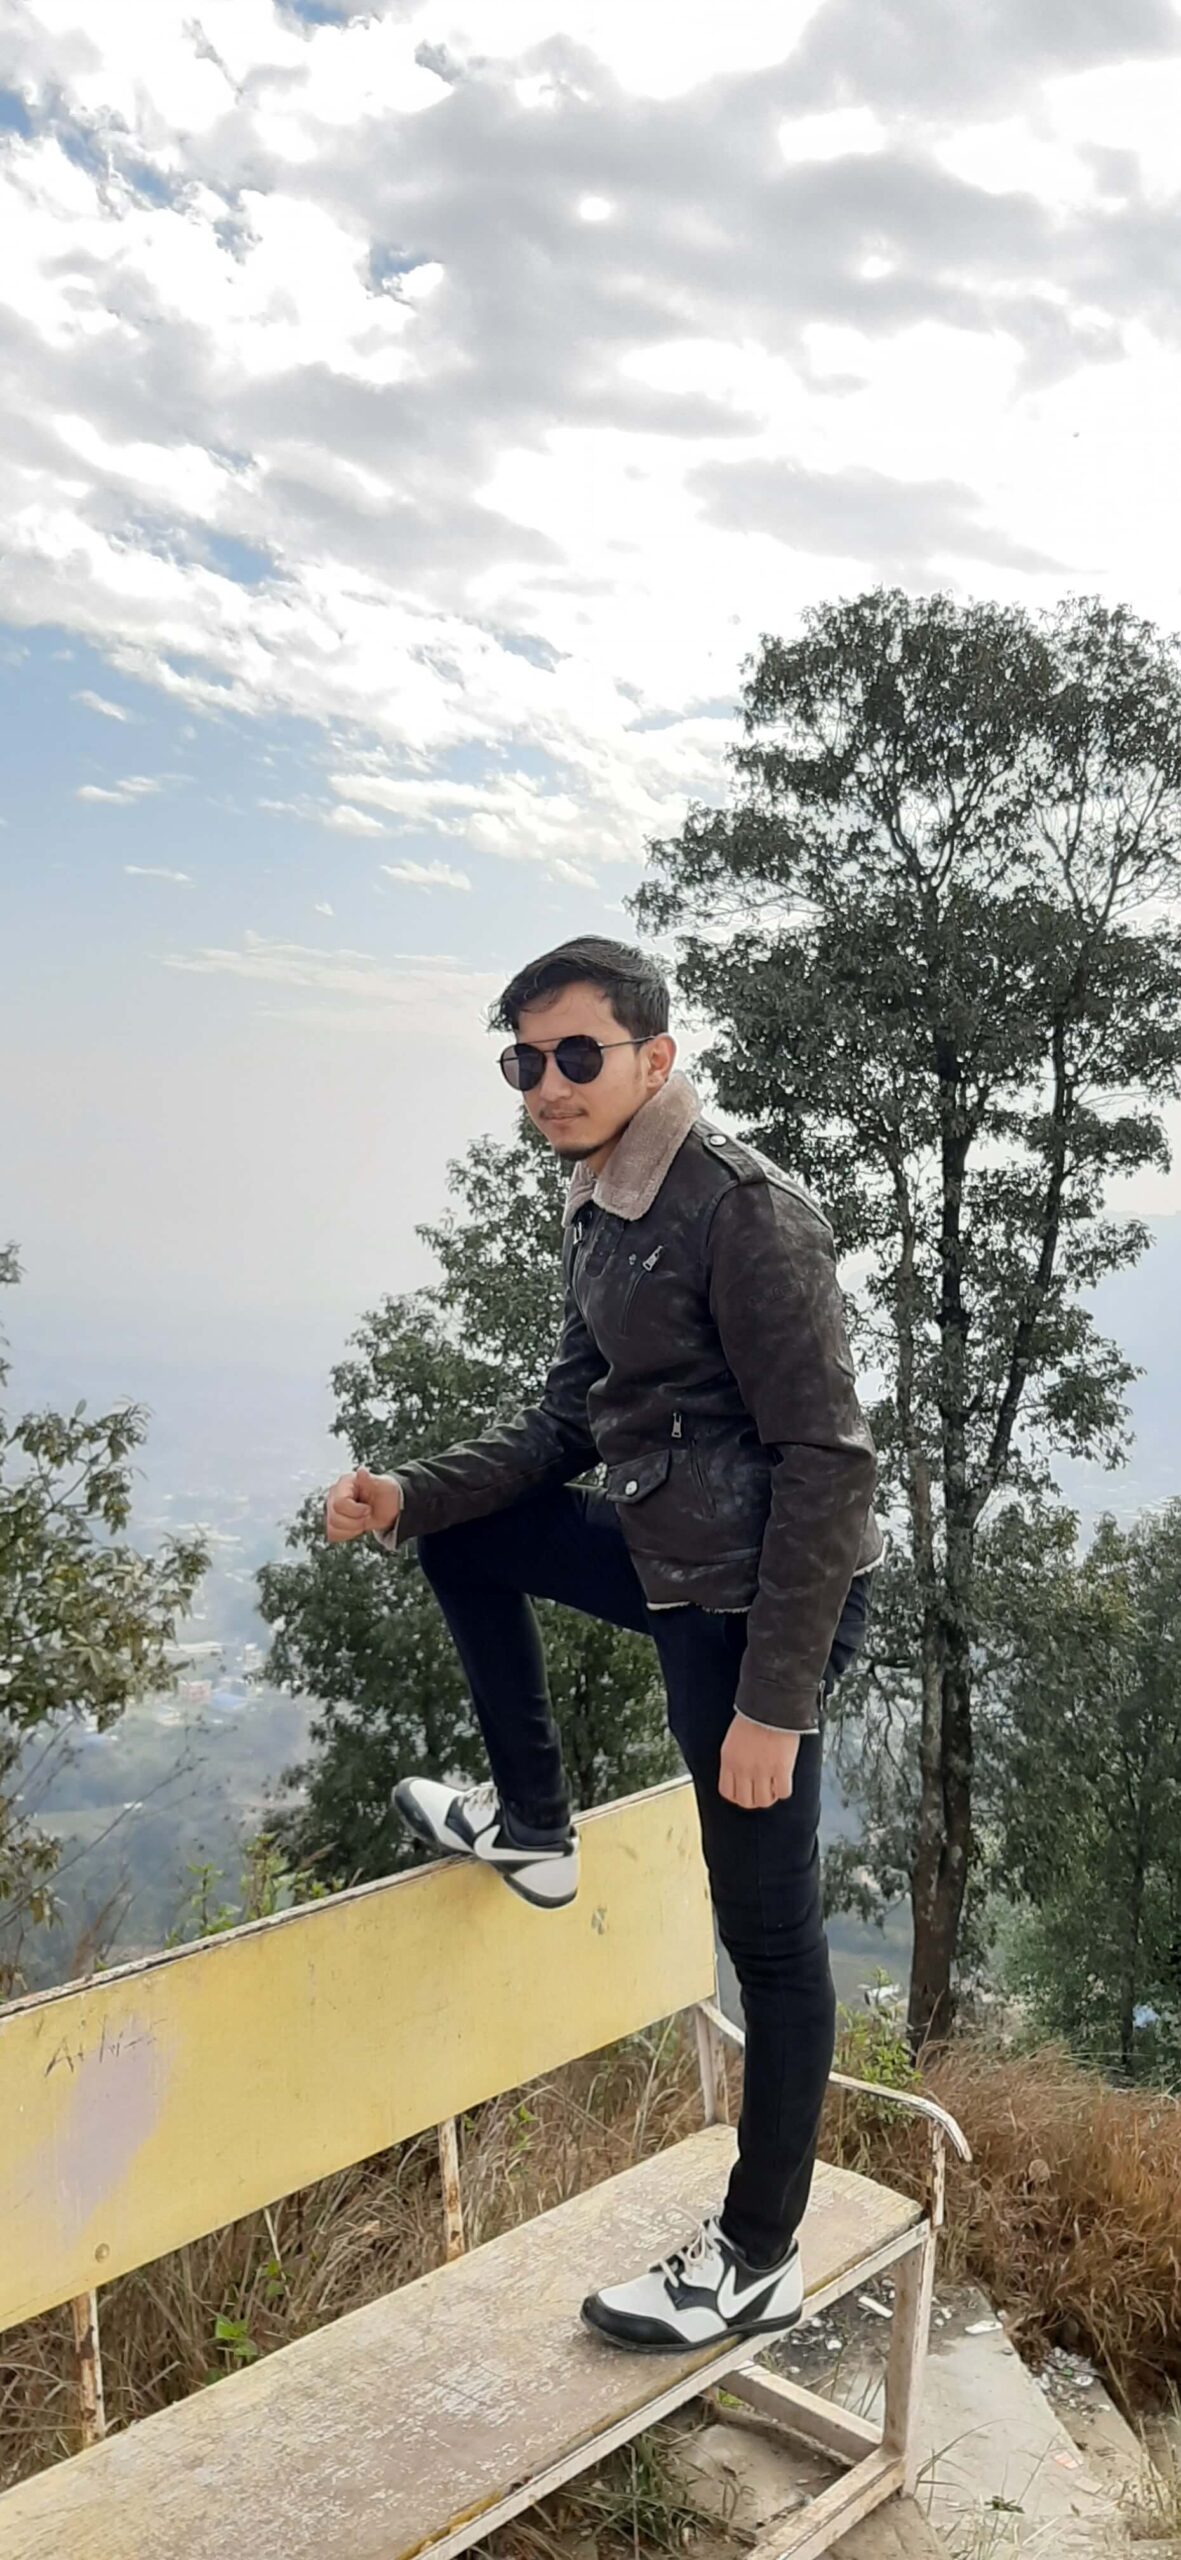 Nepali Boy Wilson Shrestha, Standing on chair and chill with the environment 